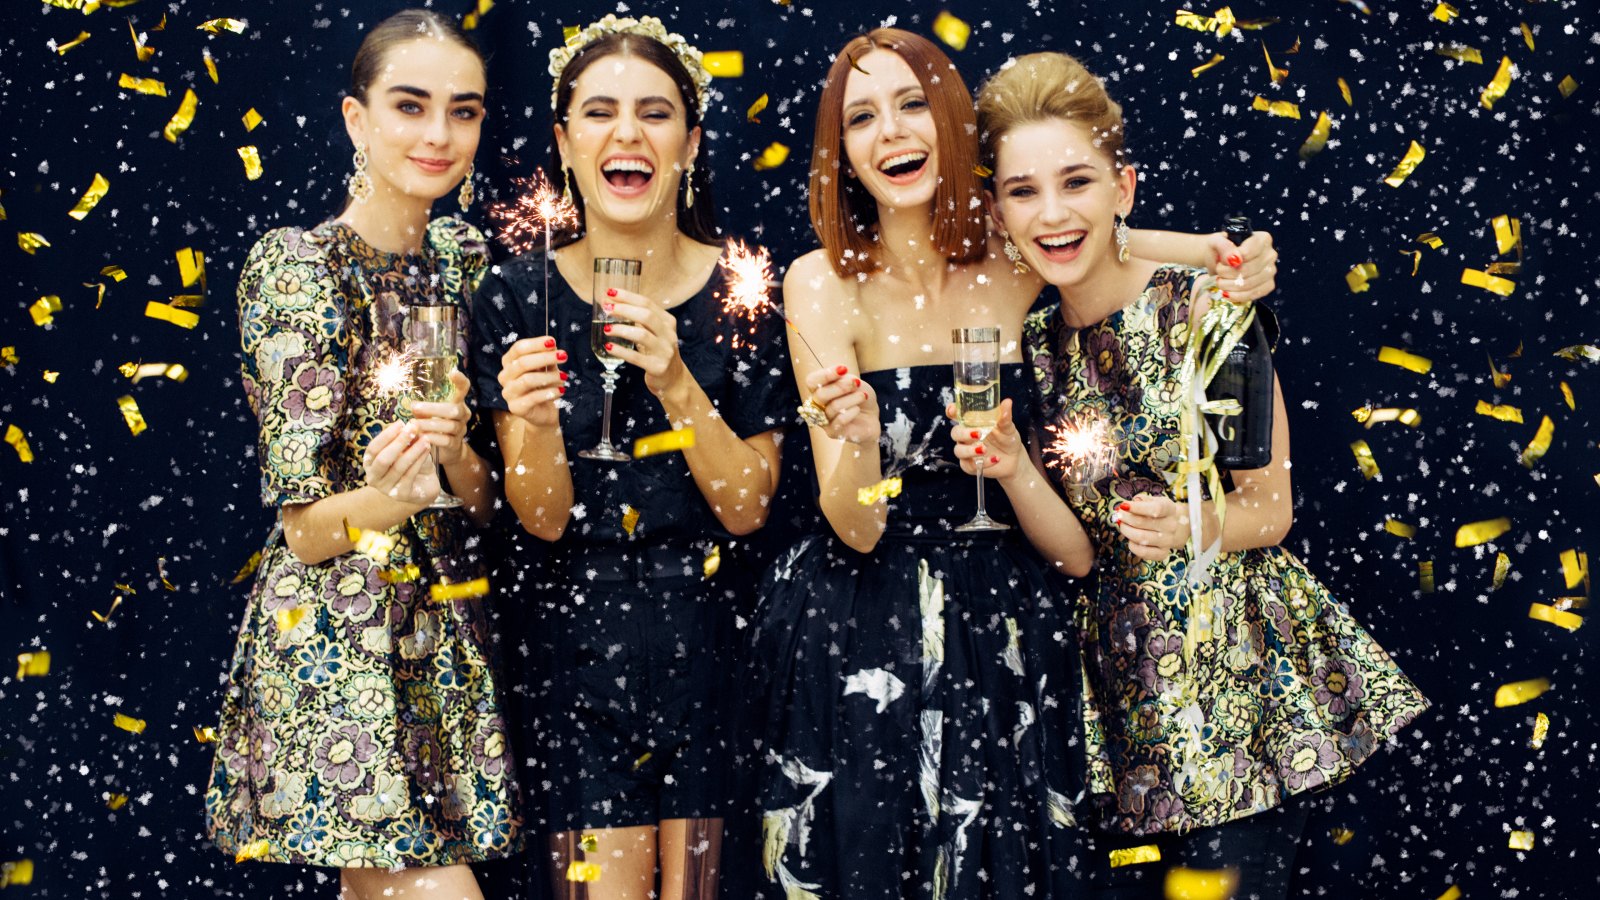 This is what women are wearing this New Year's Eve